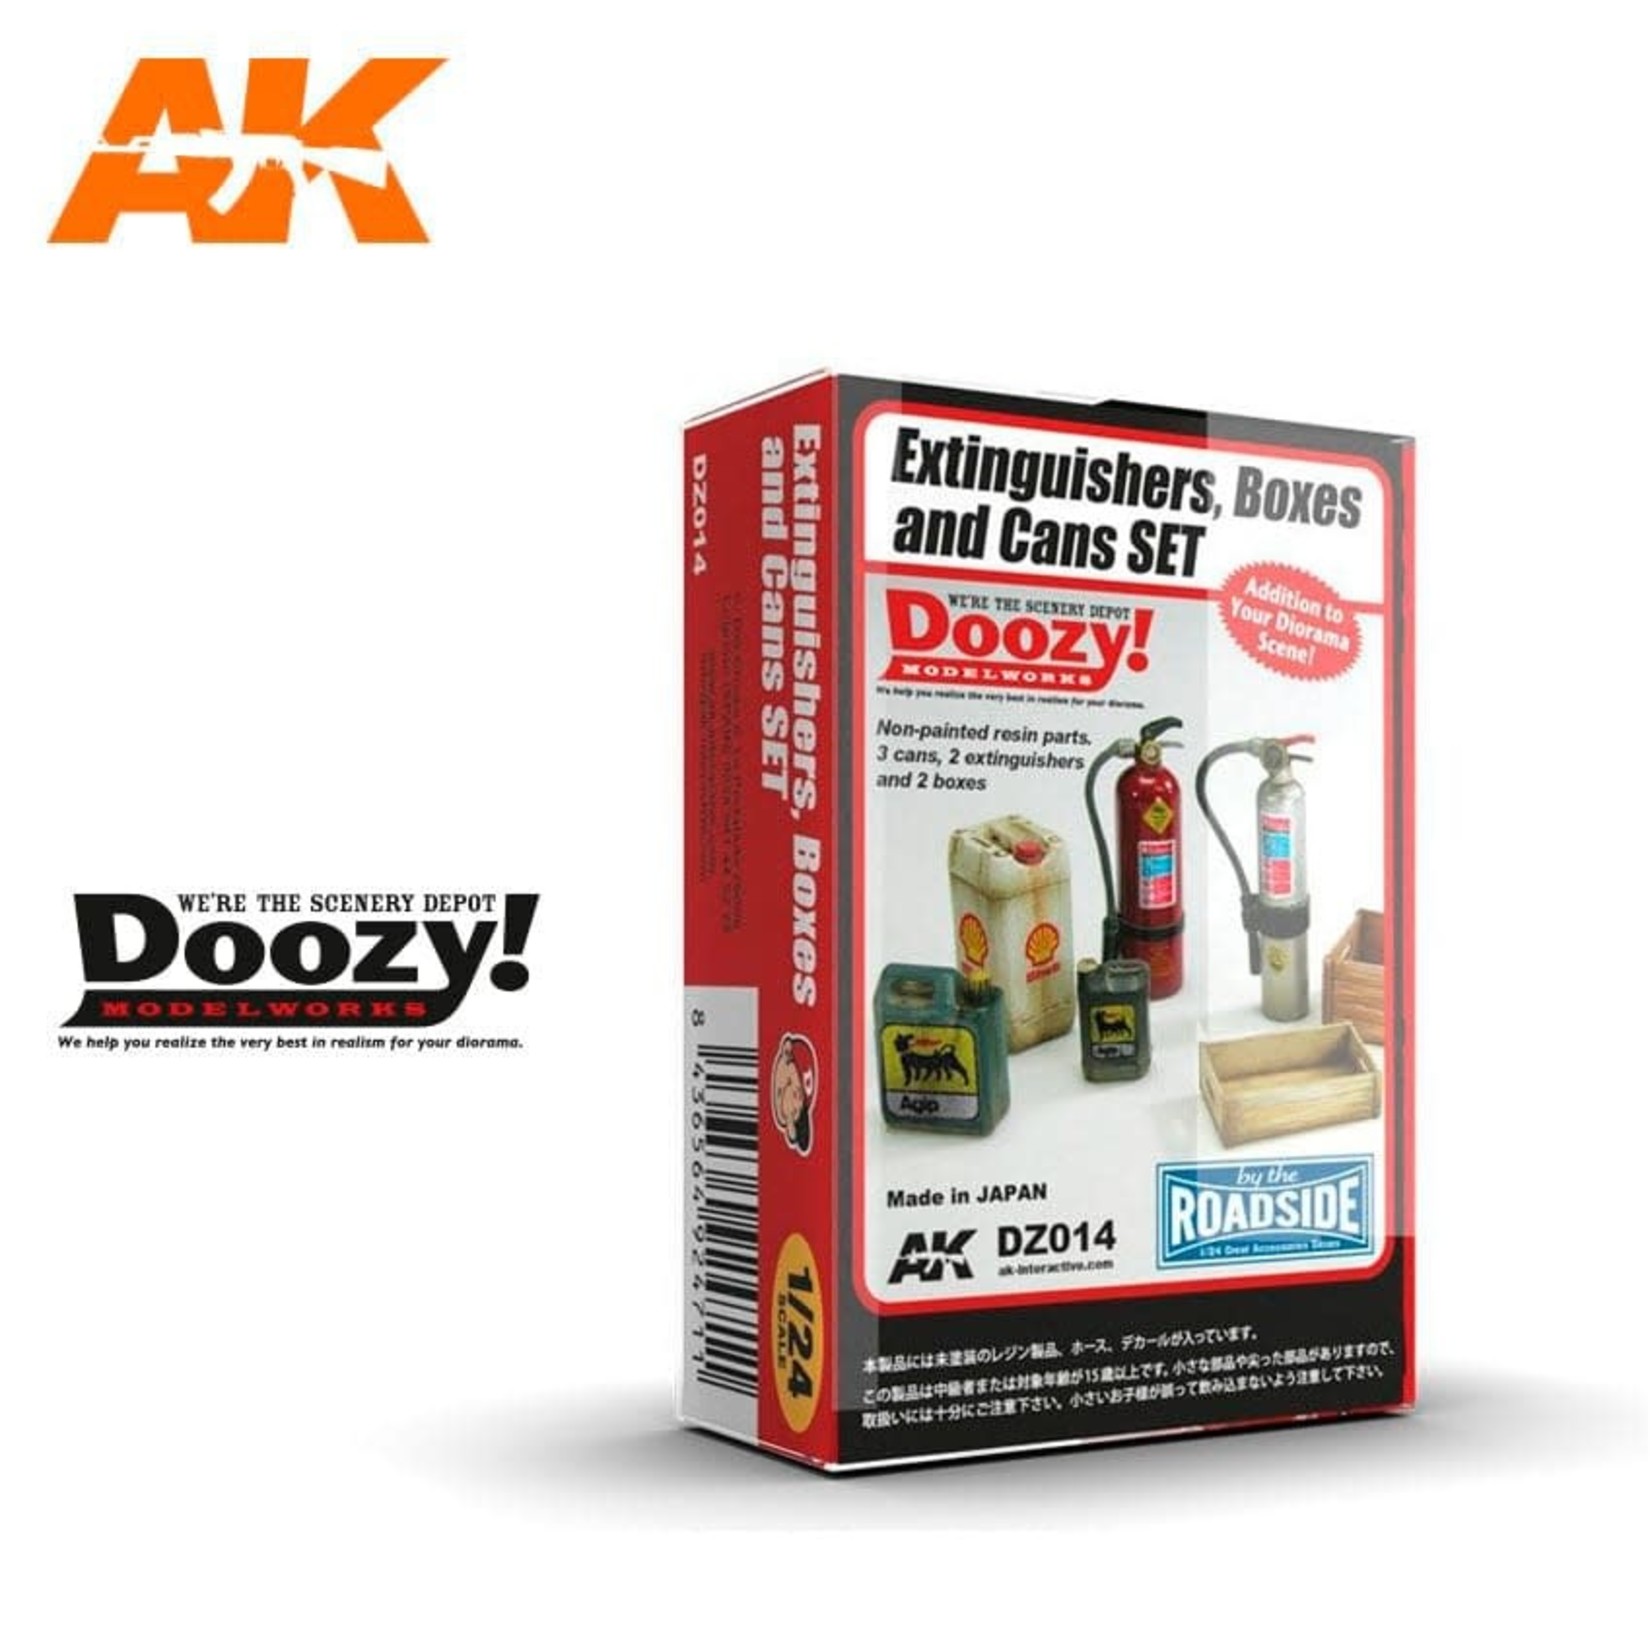 Doozy 1/24 Extinguishers, Boxes And Cans Set Kit-Clearance